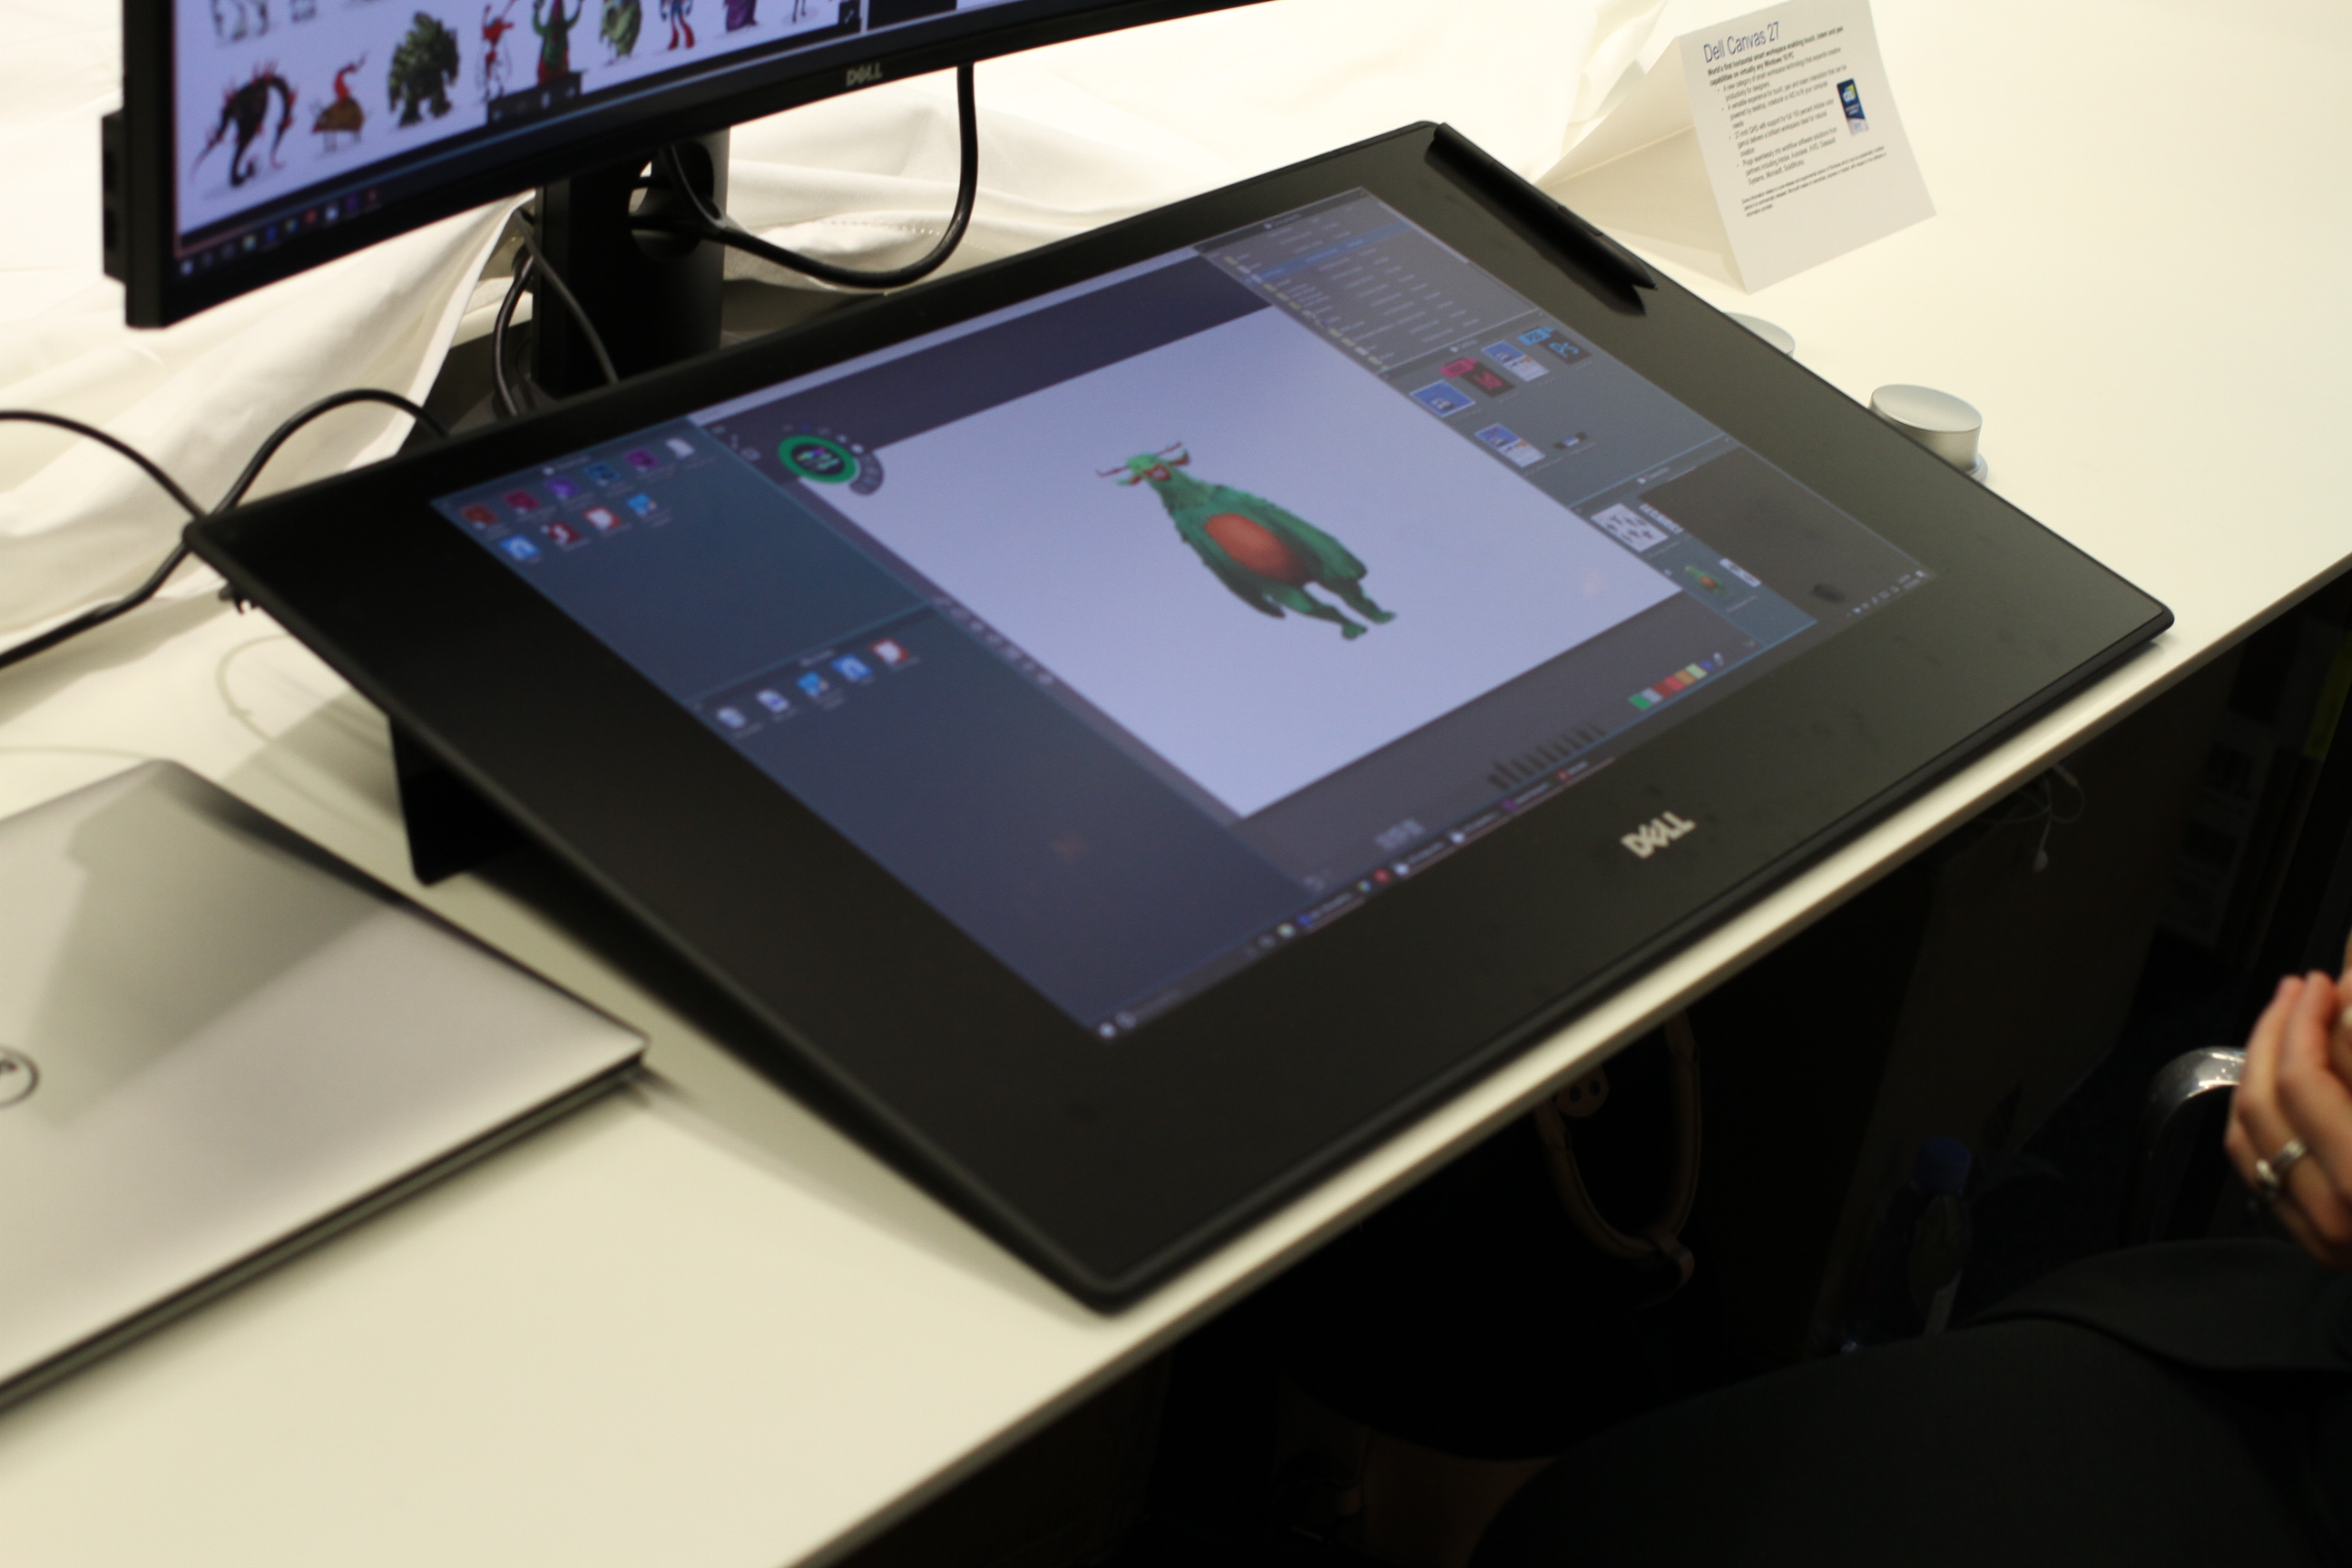 Dell's Canvas is a 27-inch tablet for creative professionals